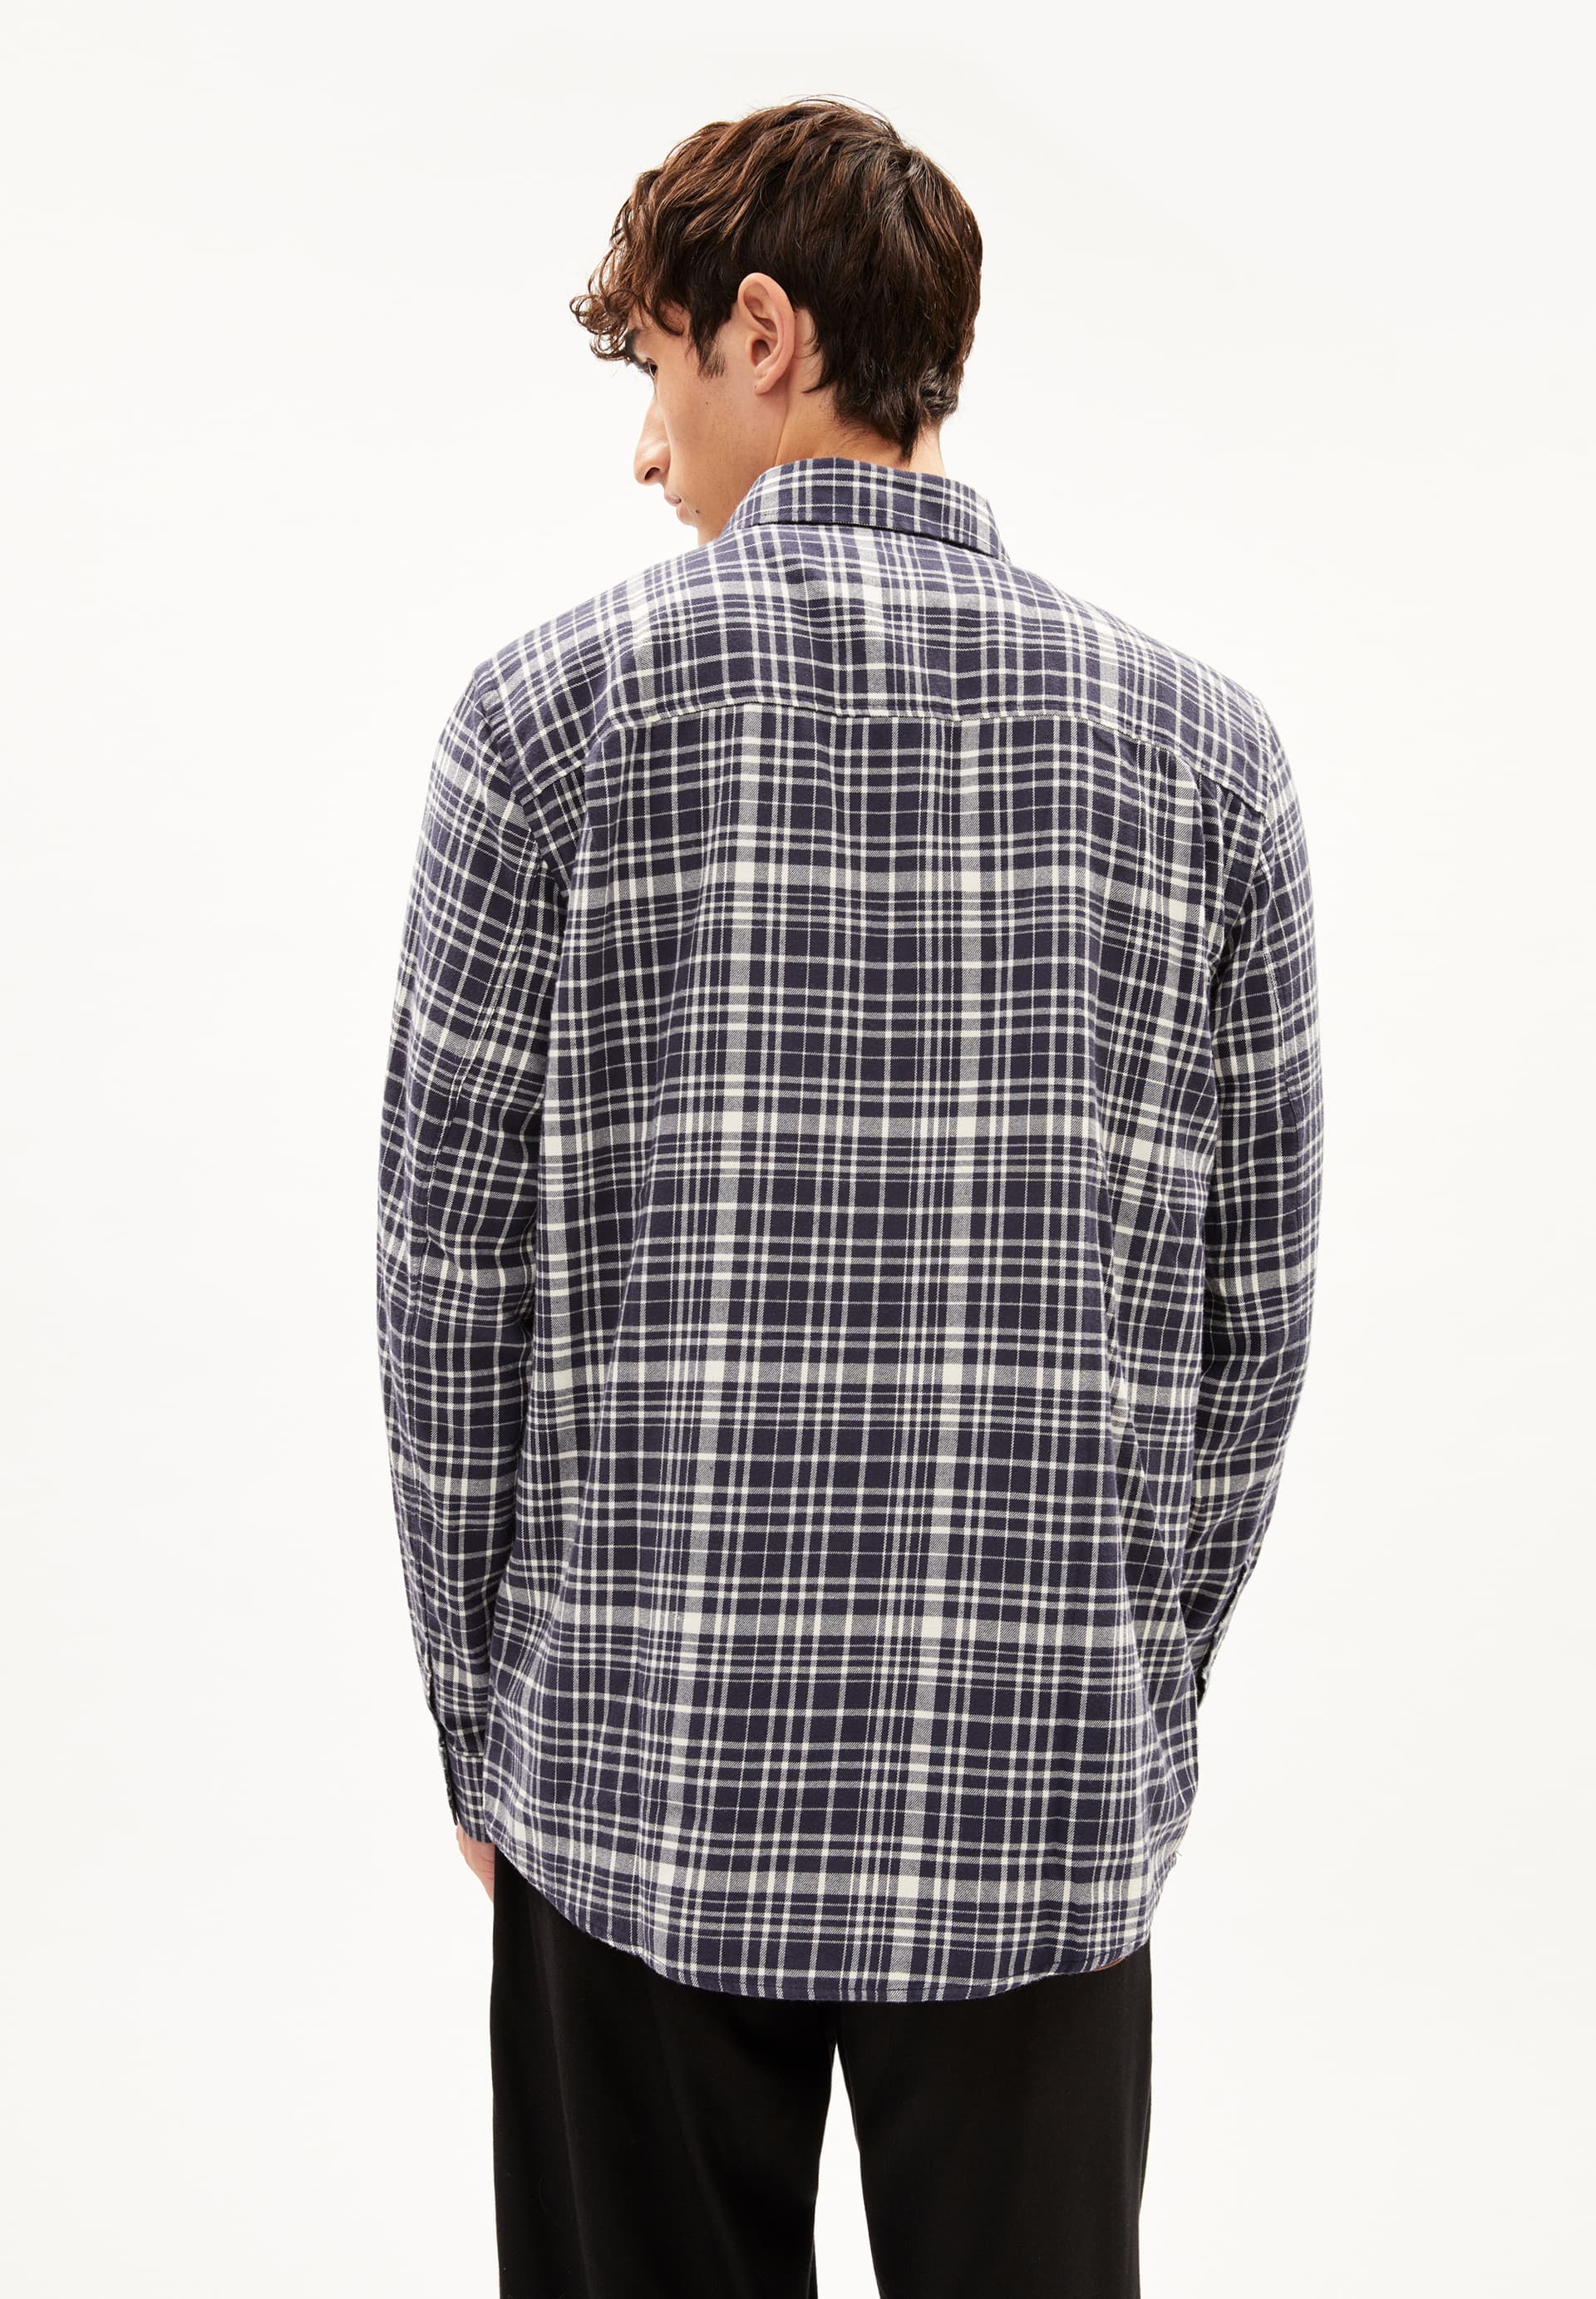 AARSENIO Shirt Relaxed Fit made of Organic Cotton